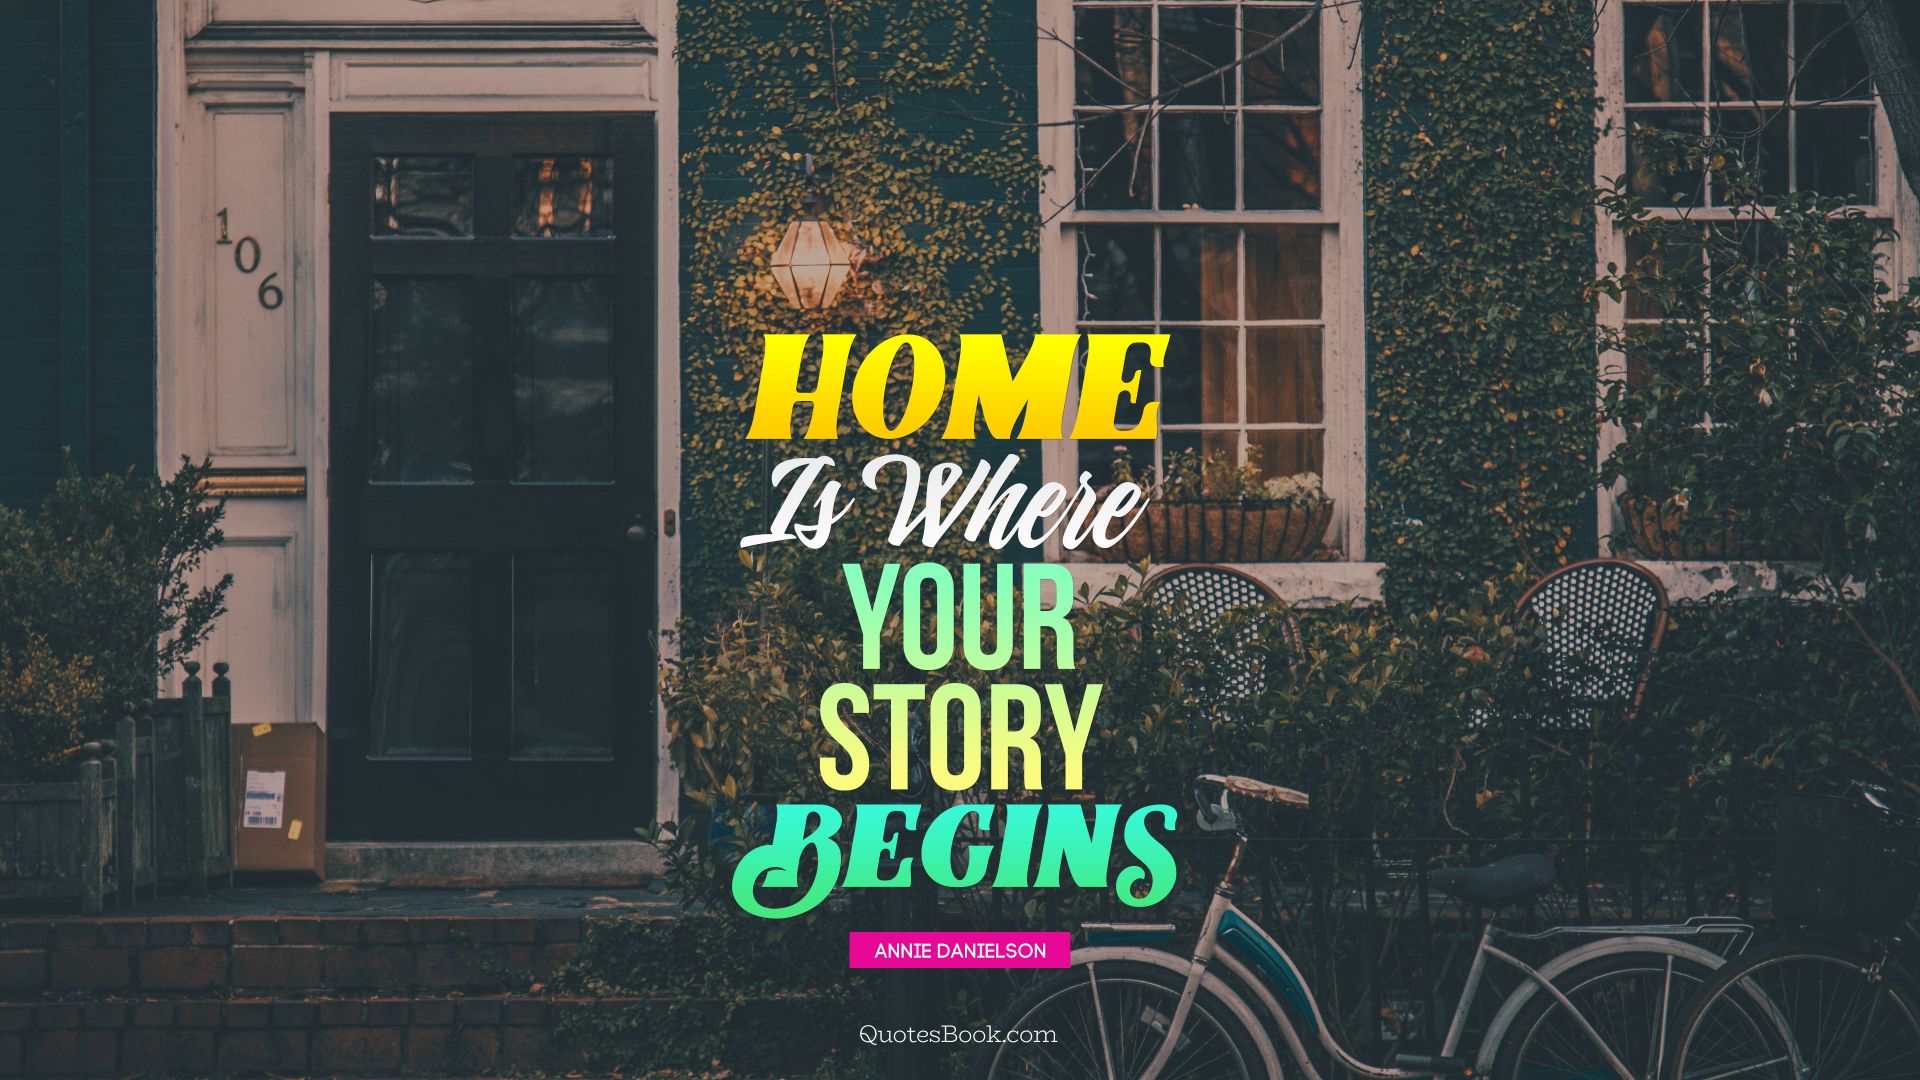 Home is where your story begins. - Quote by Annie Danielson